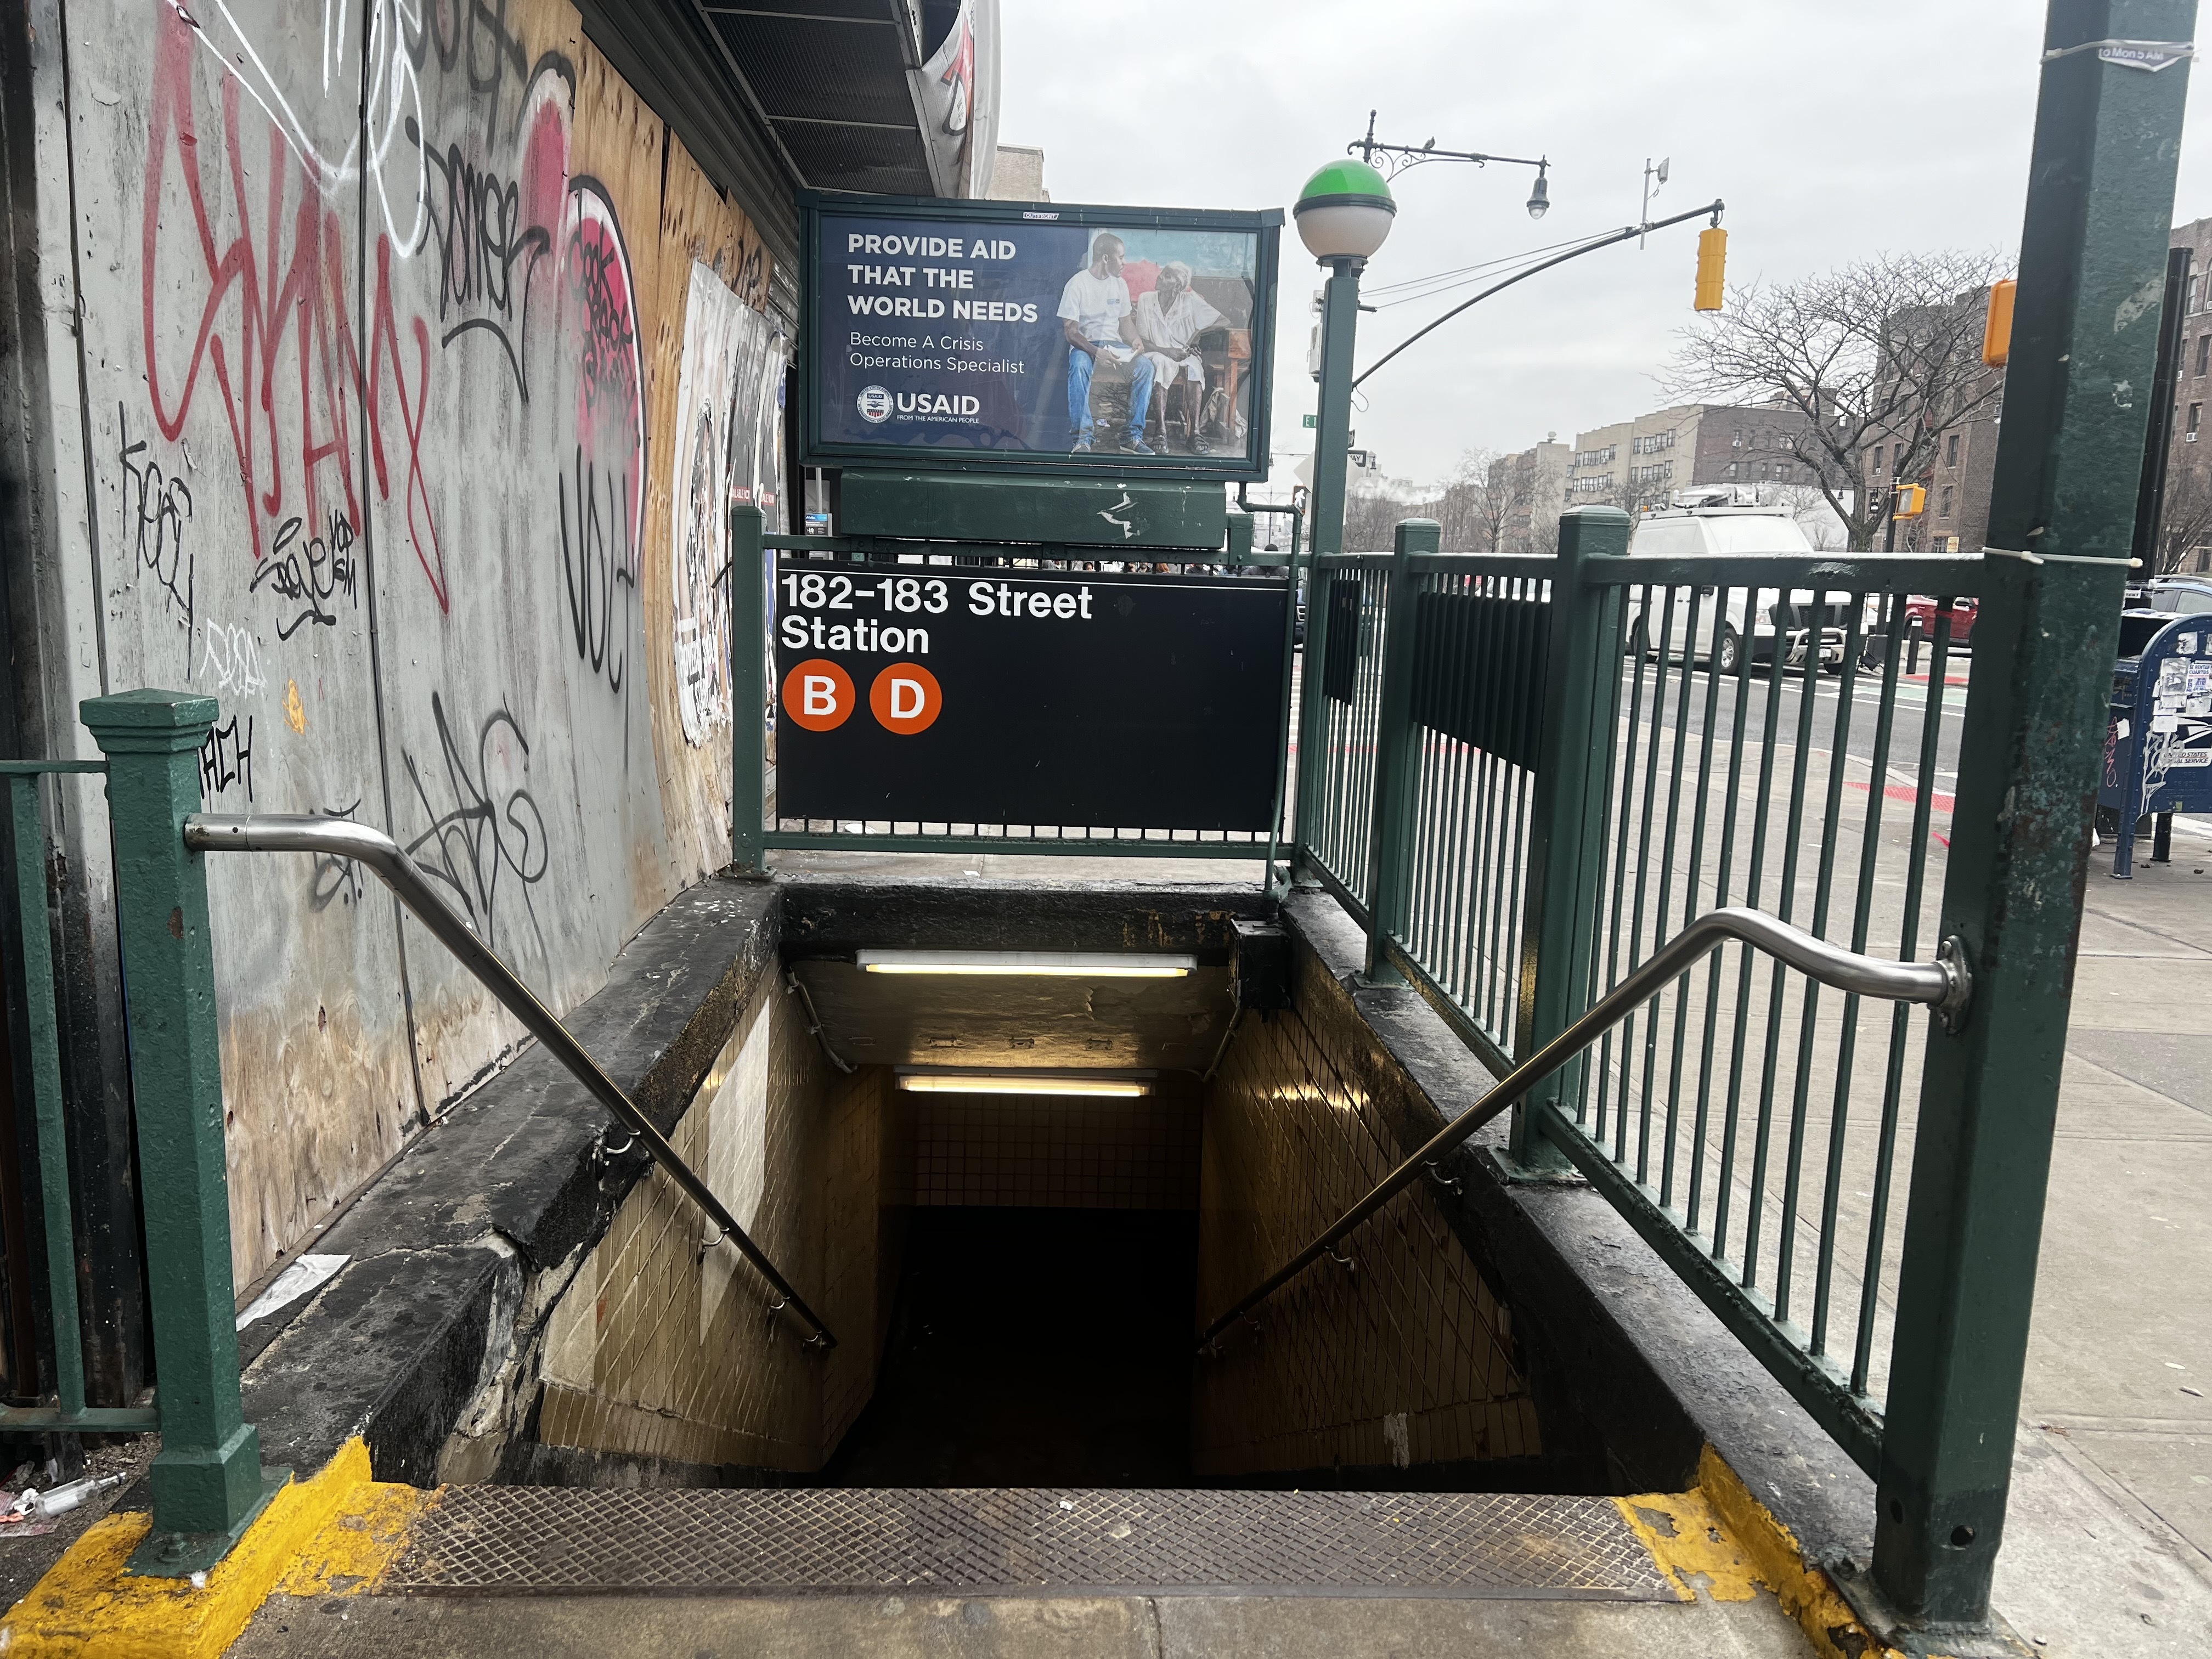 The entrance to the 182-183 Street Station in the Bronx.